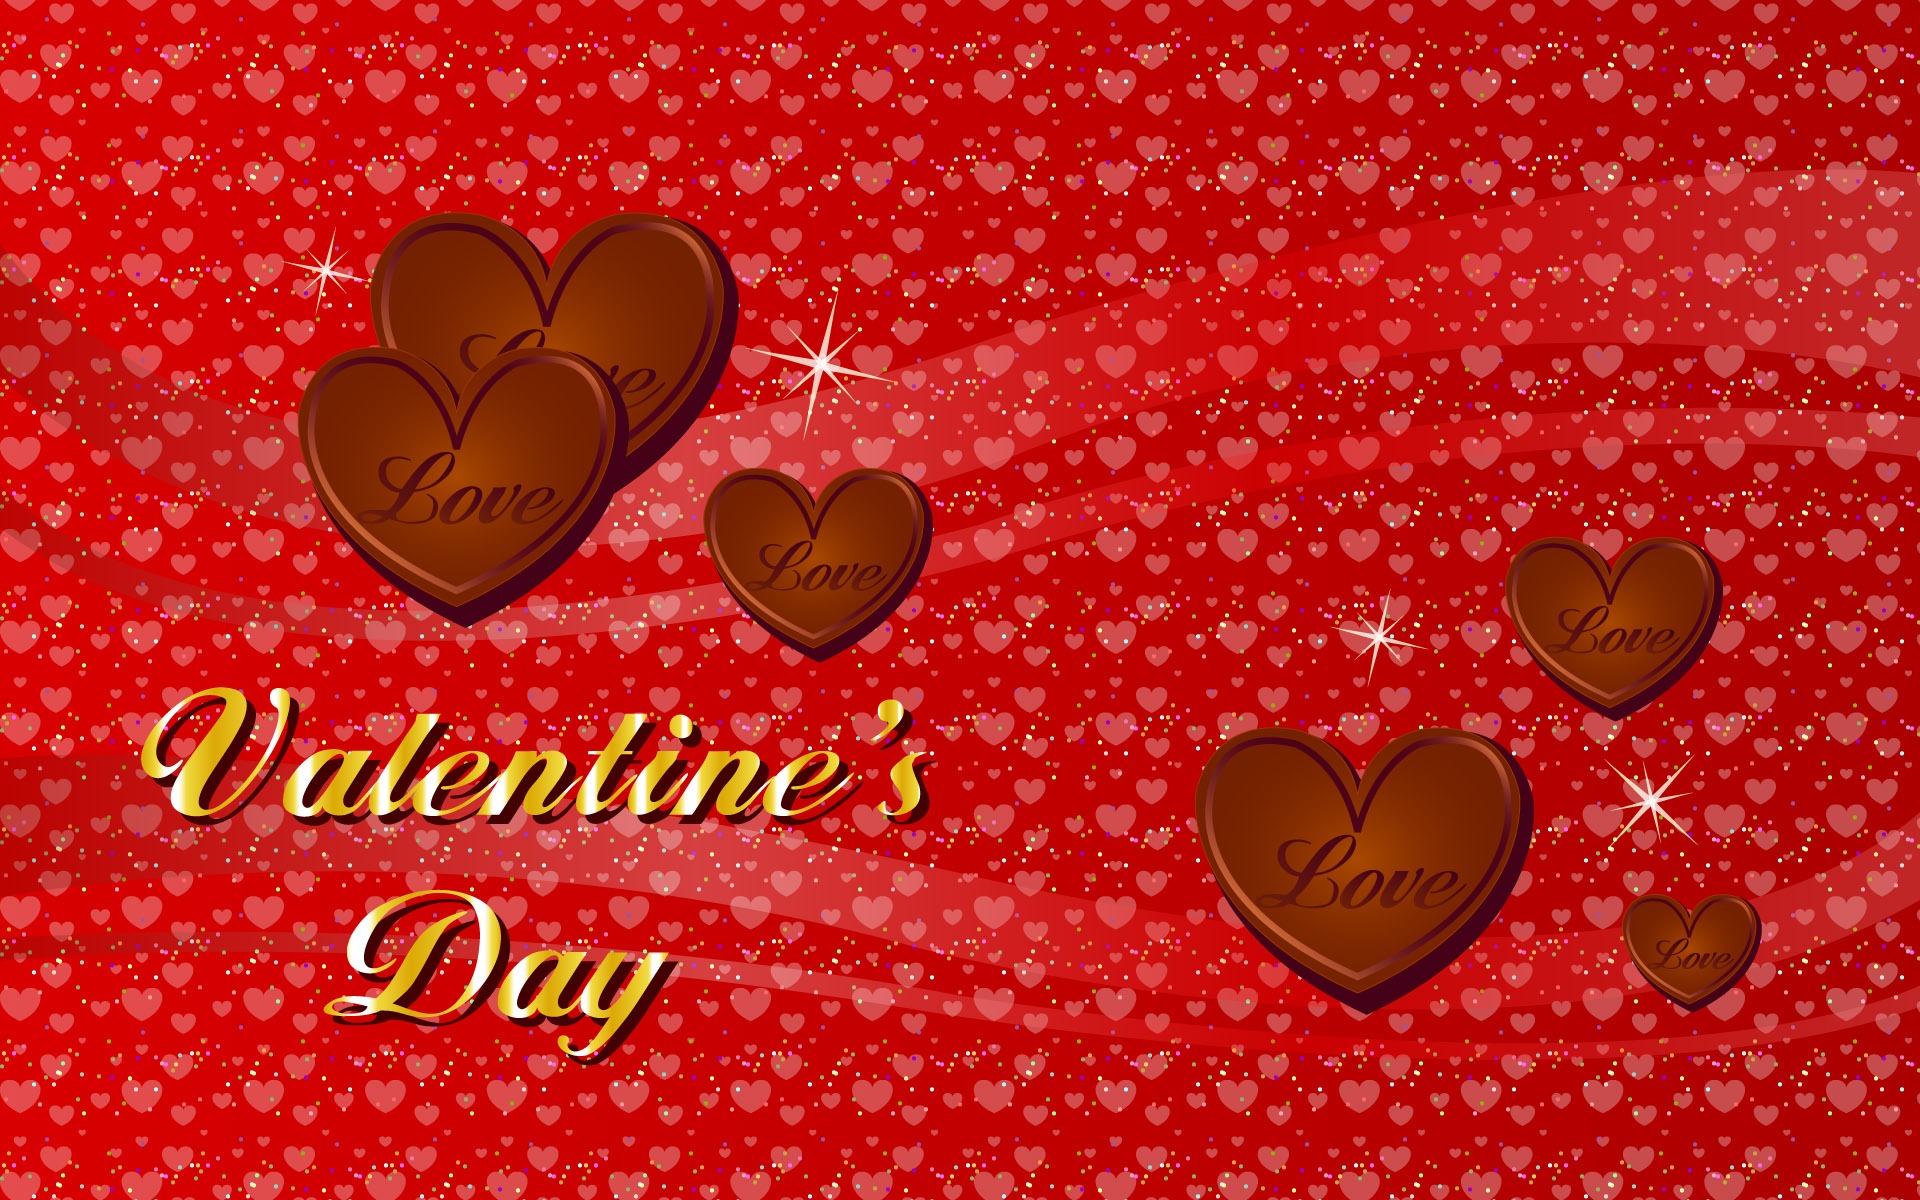 Valentine's Day Theme Wallpapers (1) #14 - 1920x1200